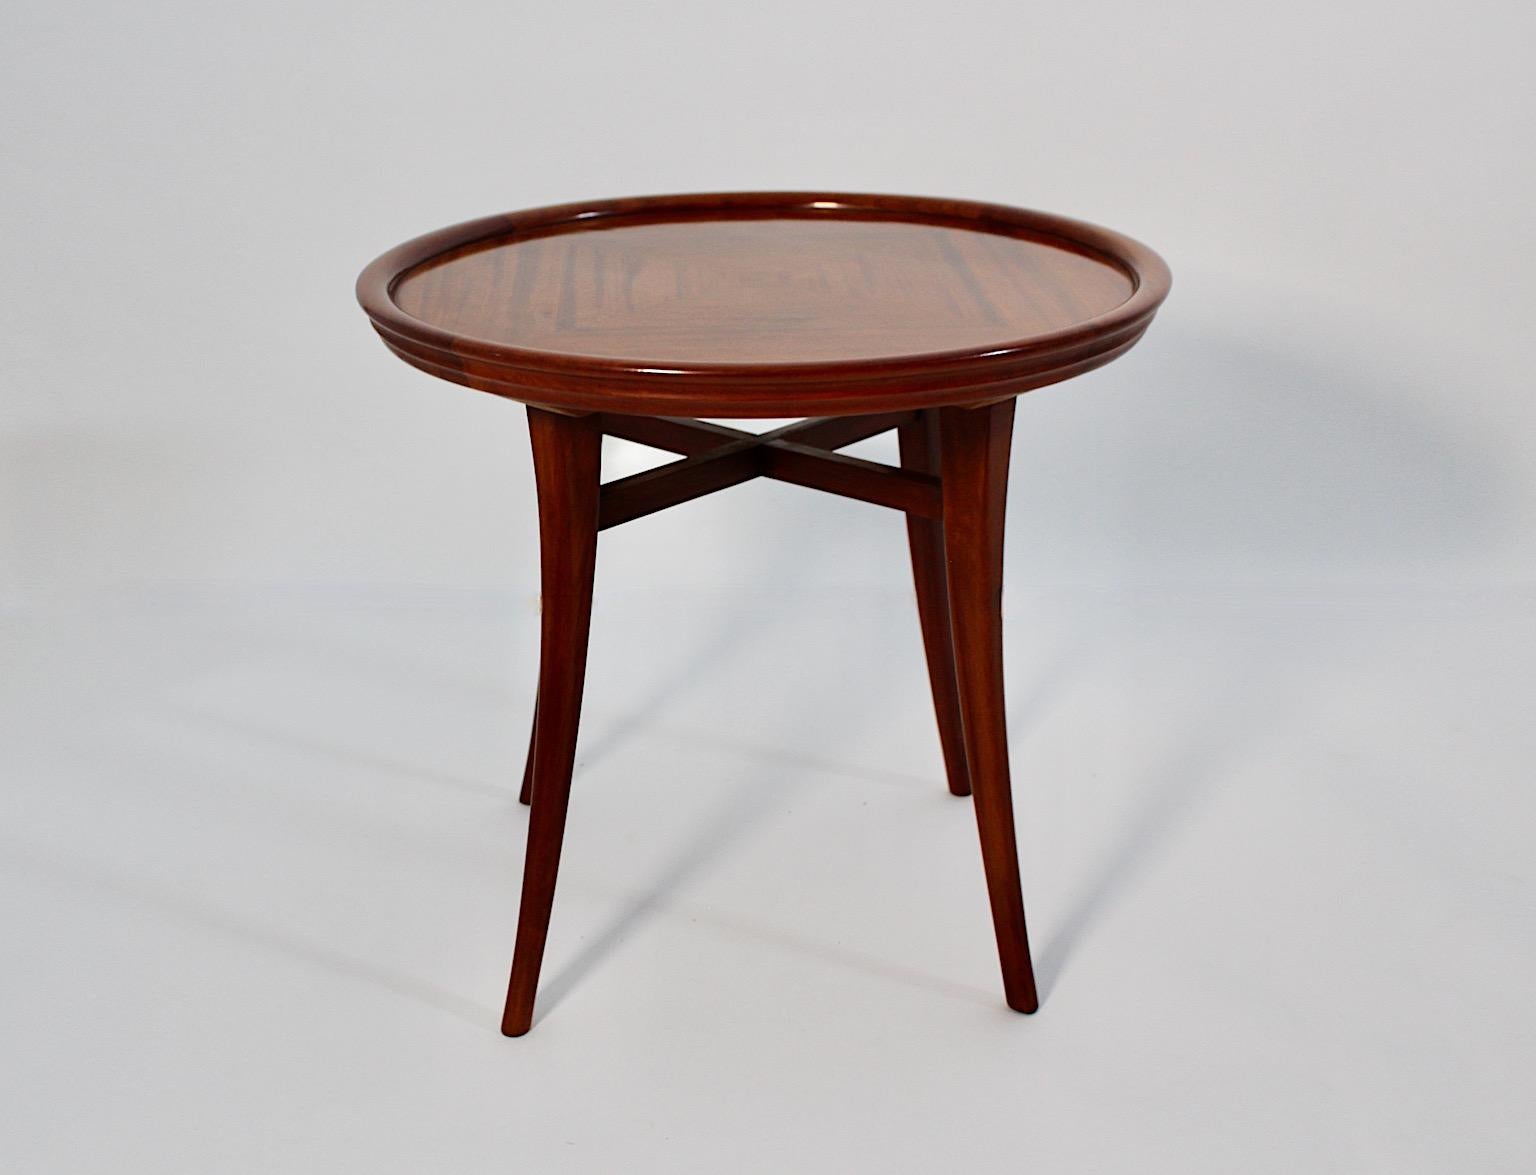 Art Deco vintage side table of sofa table from solid walnut and walnut veneer 1930s Vienna.
A stunning and high quality example from the range of Wiener Möbel 
made from walnut in circular shape and slightly curved feet.
The walnut veneered top